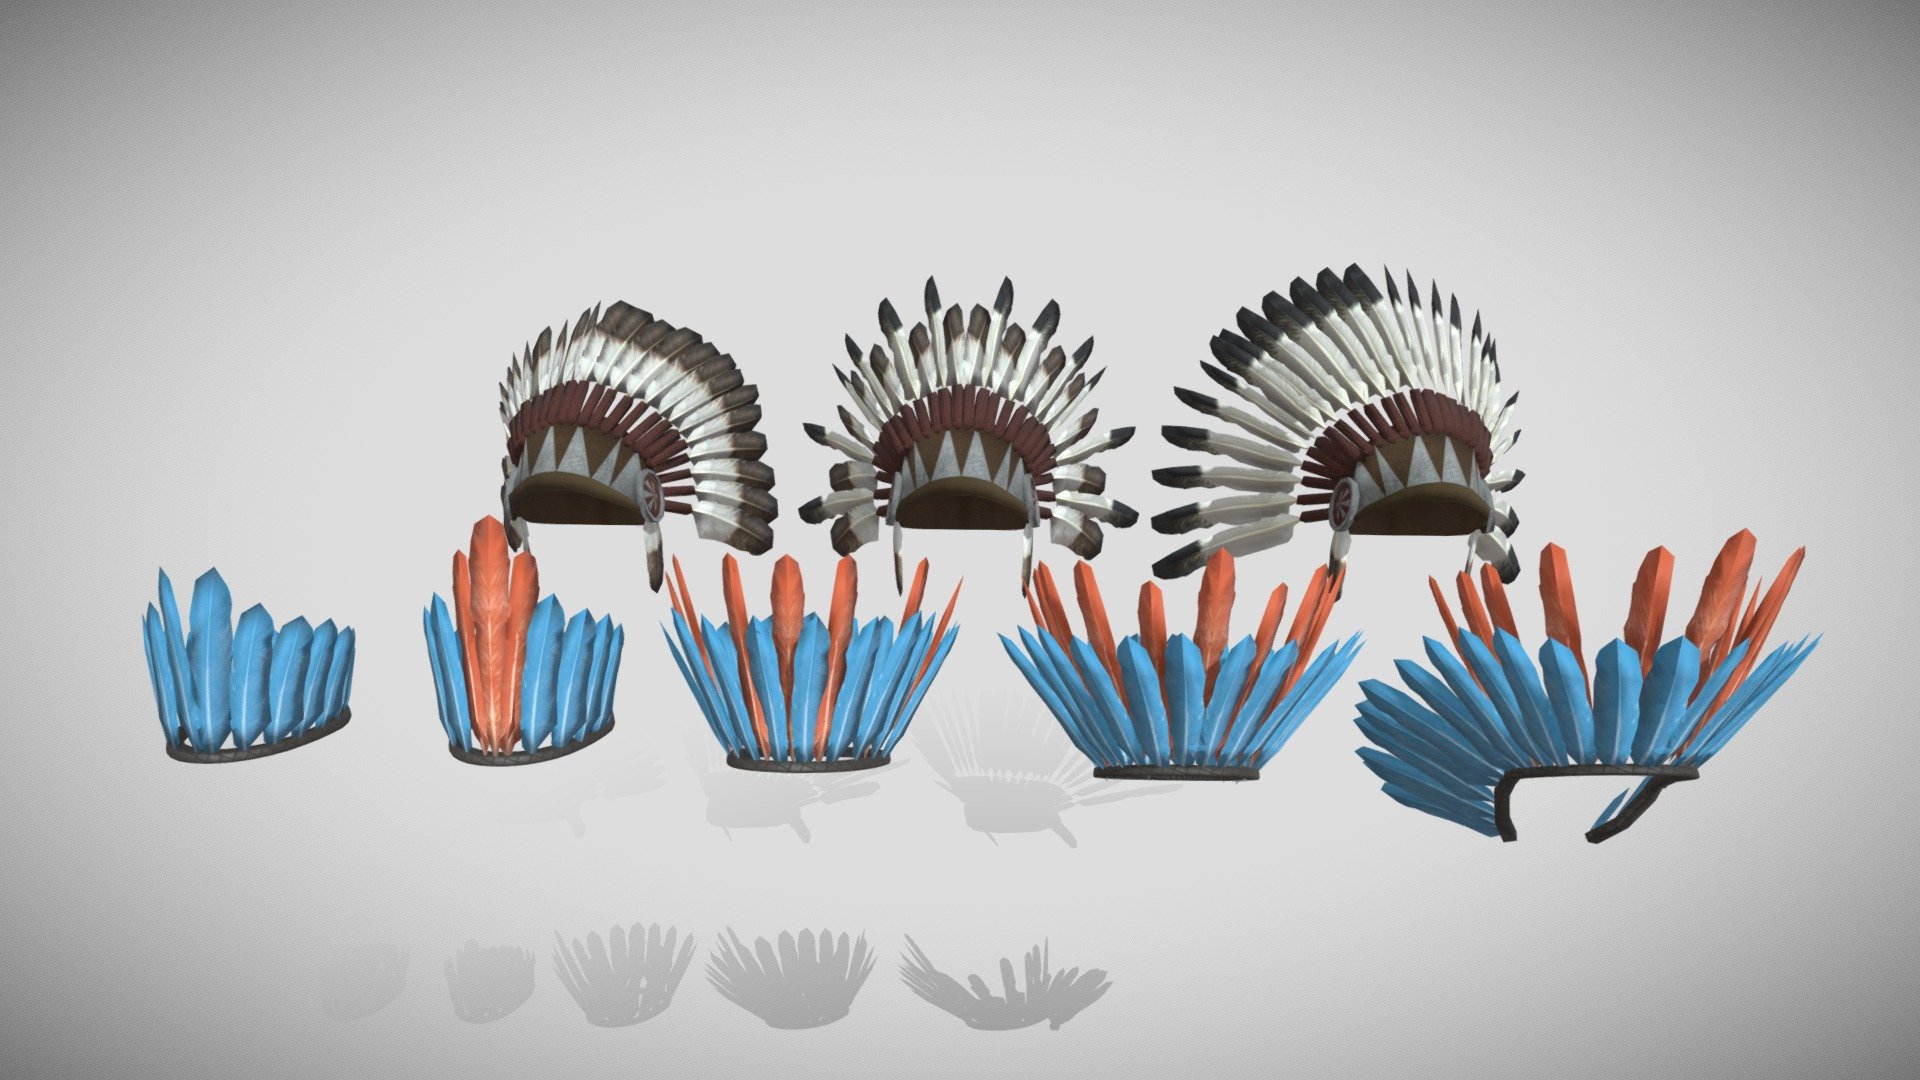 Low Poly Headdress in the style of north american plains natives and south american amazonian indigenous tribes

Texture: 2048x2048 px

Diffuse 

Normal 

Roughness 

AO (plains headress only)

Polygons:

Amazonian Headdress: 1000 - 2000 Tris 

Plains Headdress: 2000 - 3000 Tris - Indigenous Native Headdress Pack - Buy Royalty Free 3D model by Machine Meza (@maurib98) 3d model